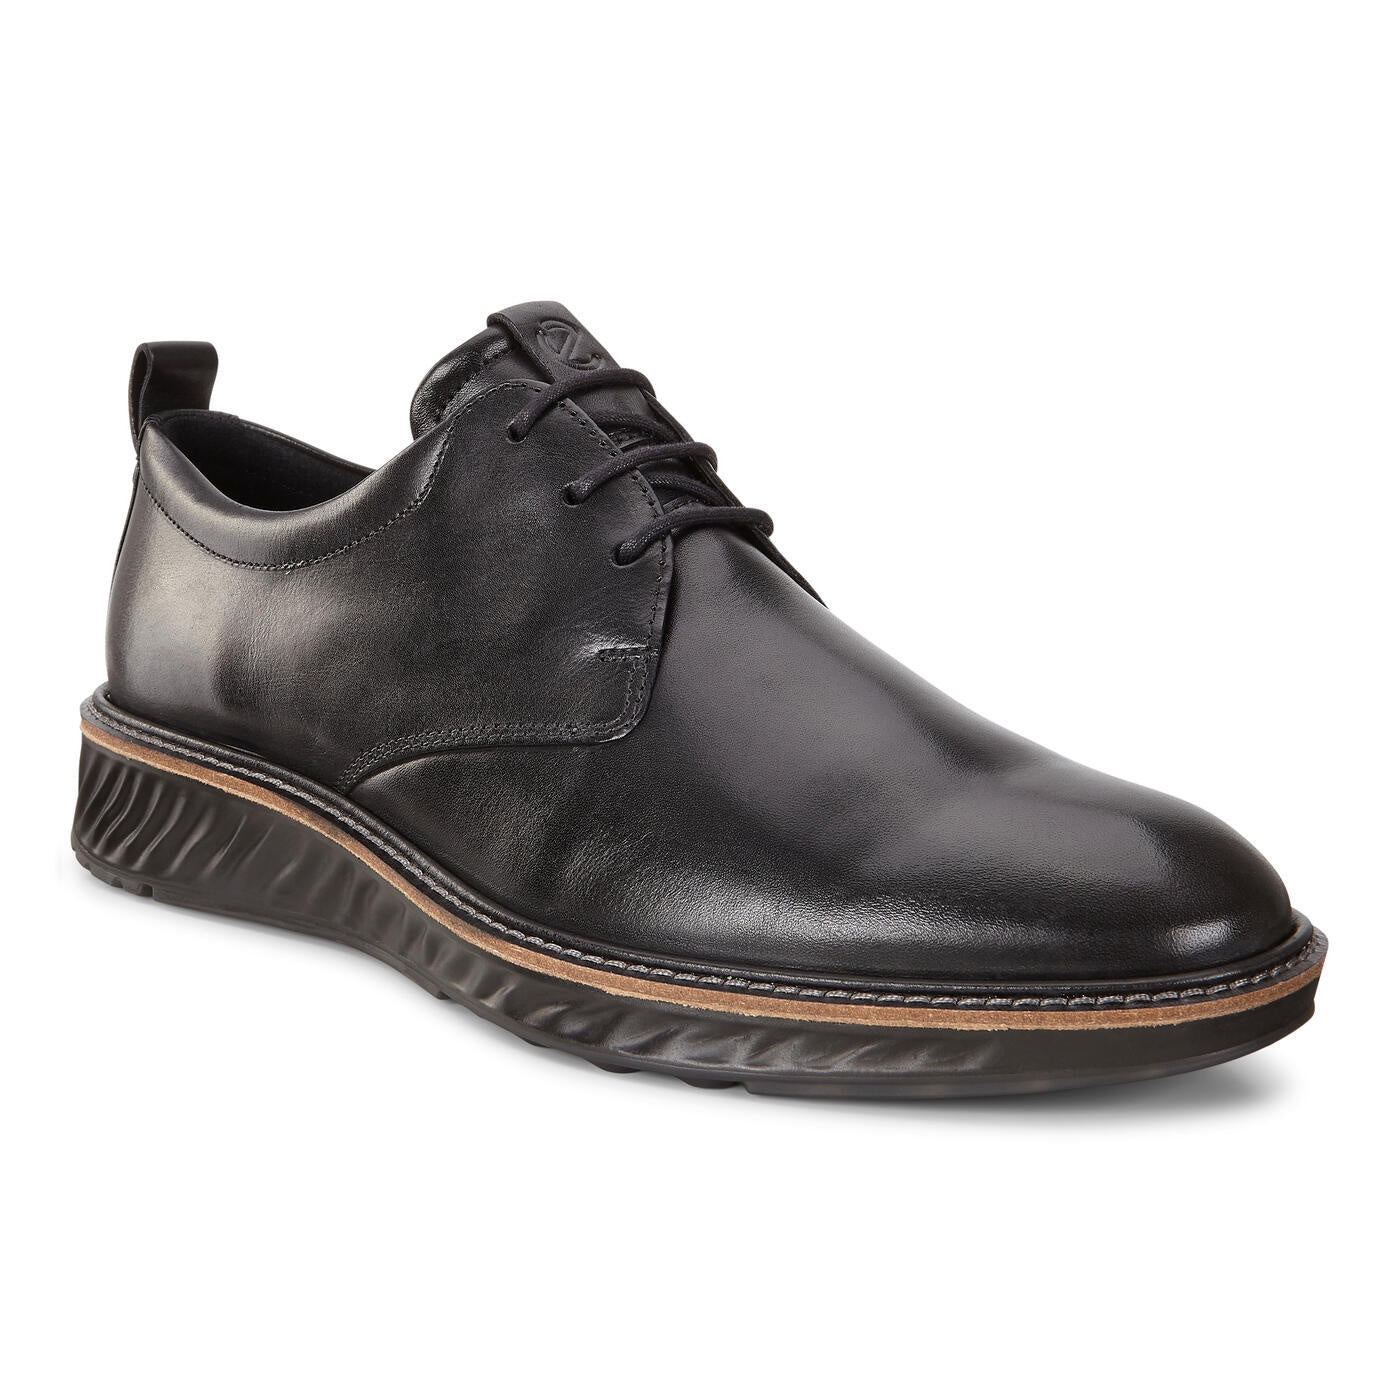 ECCO ST. 1 Hybrid Lace Up Shoe in Black